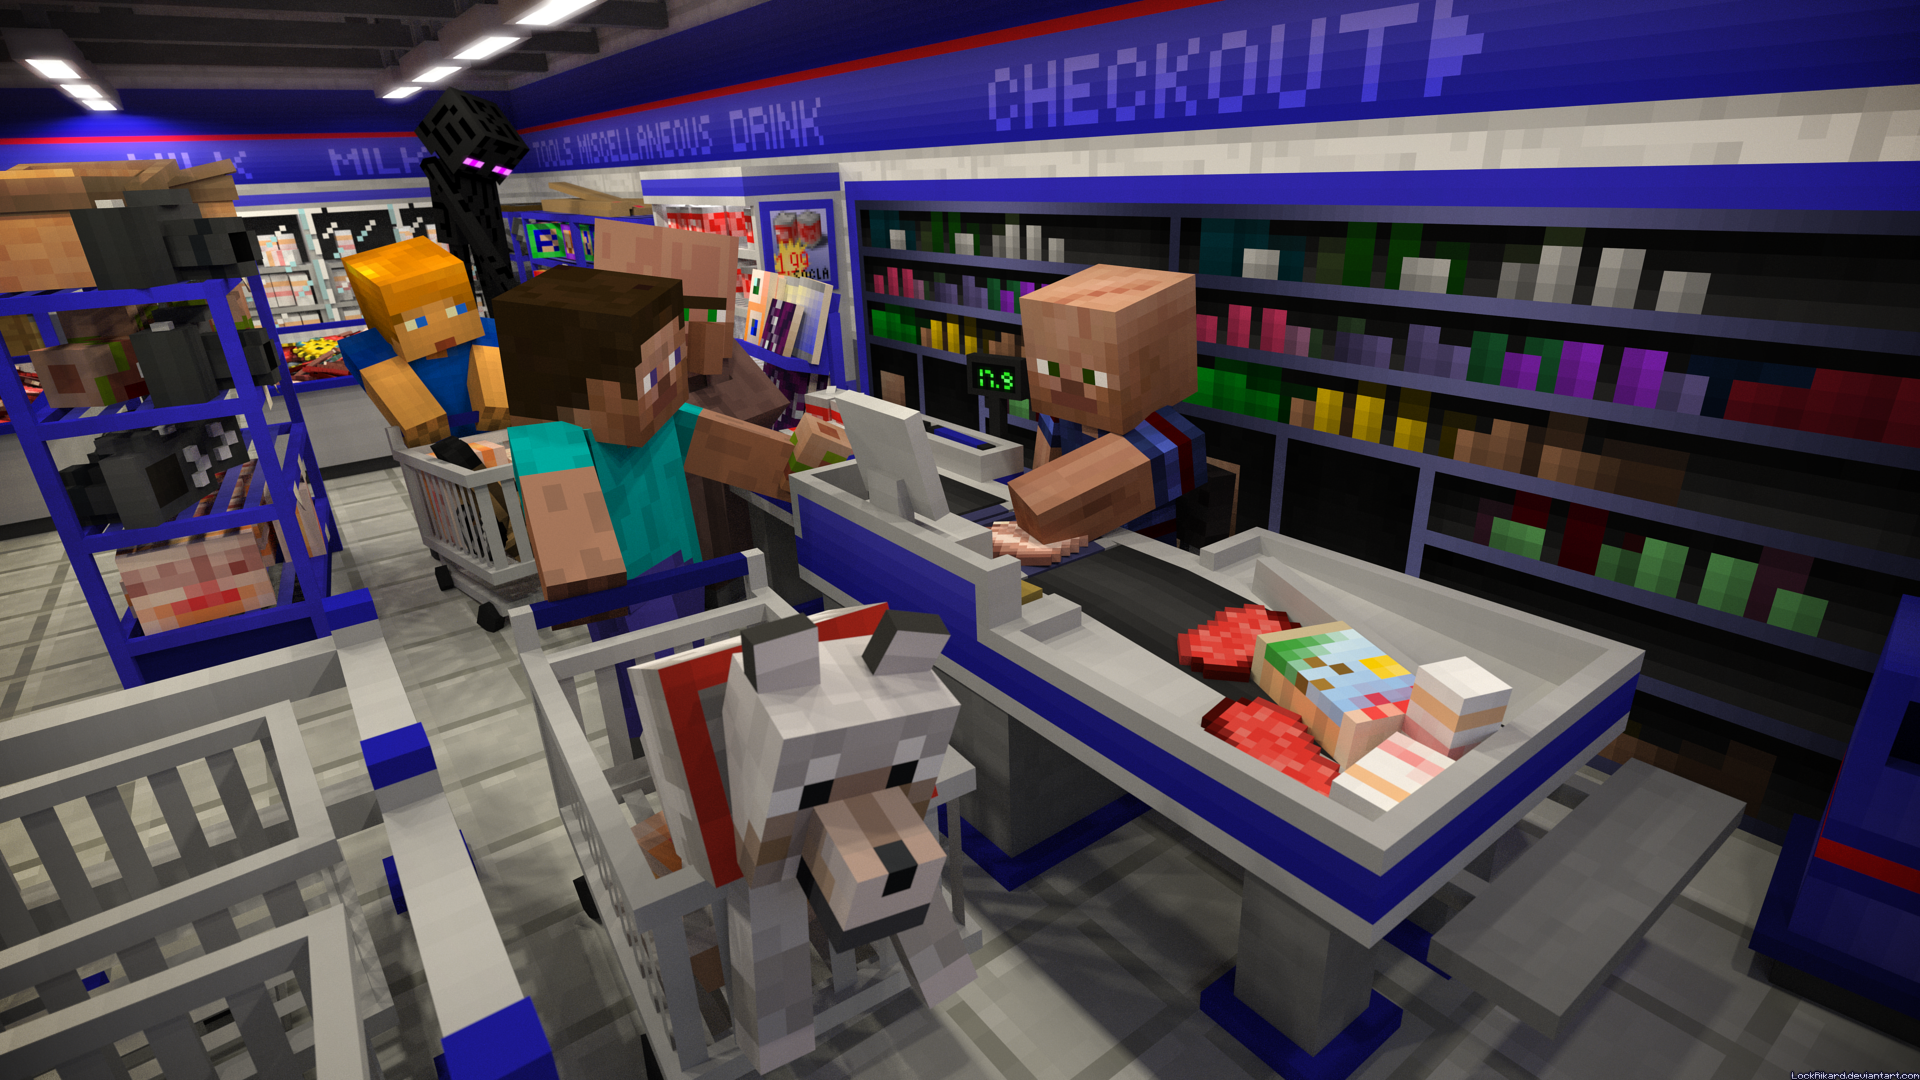 http://fc01.deviantart.net/fs71/f/2013/341/a/1/at_the_checkout_by_lockrikard-d6x0yb6.png